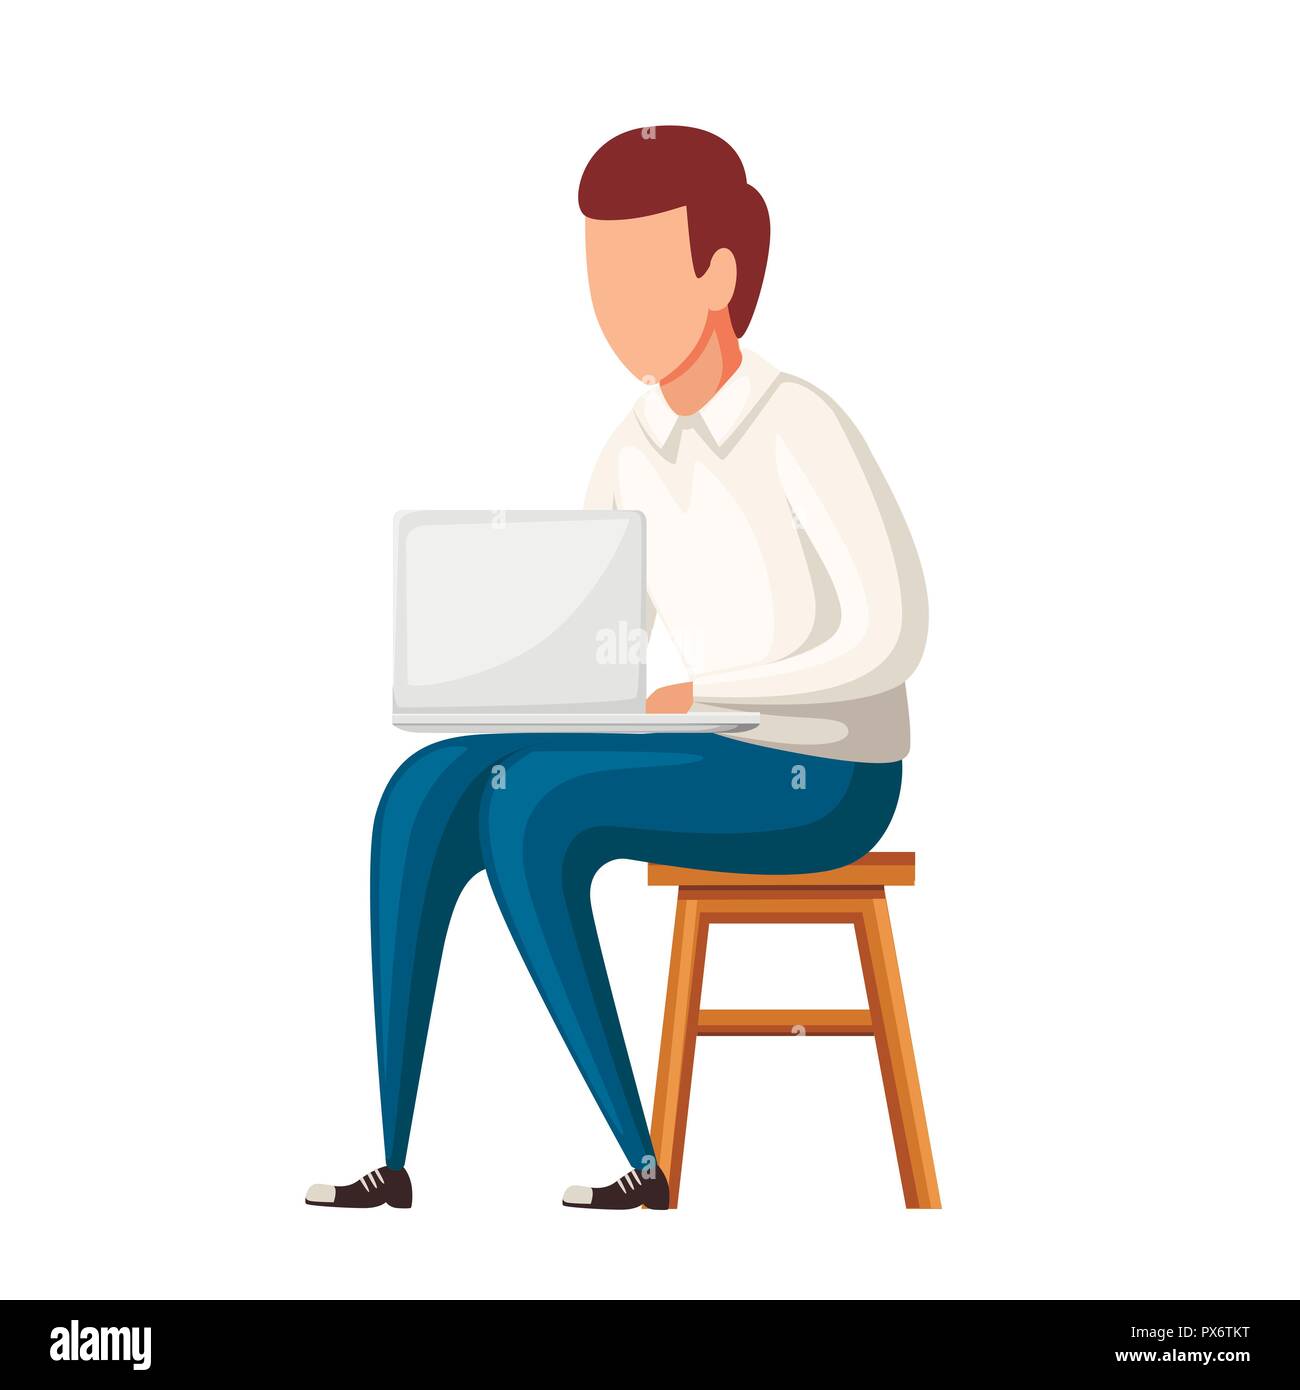 Man sit on chair with laptop. No face character design. Flat vector illustration isolated on white background. Stock Vector